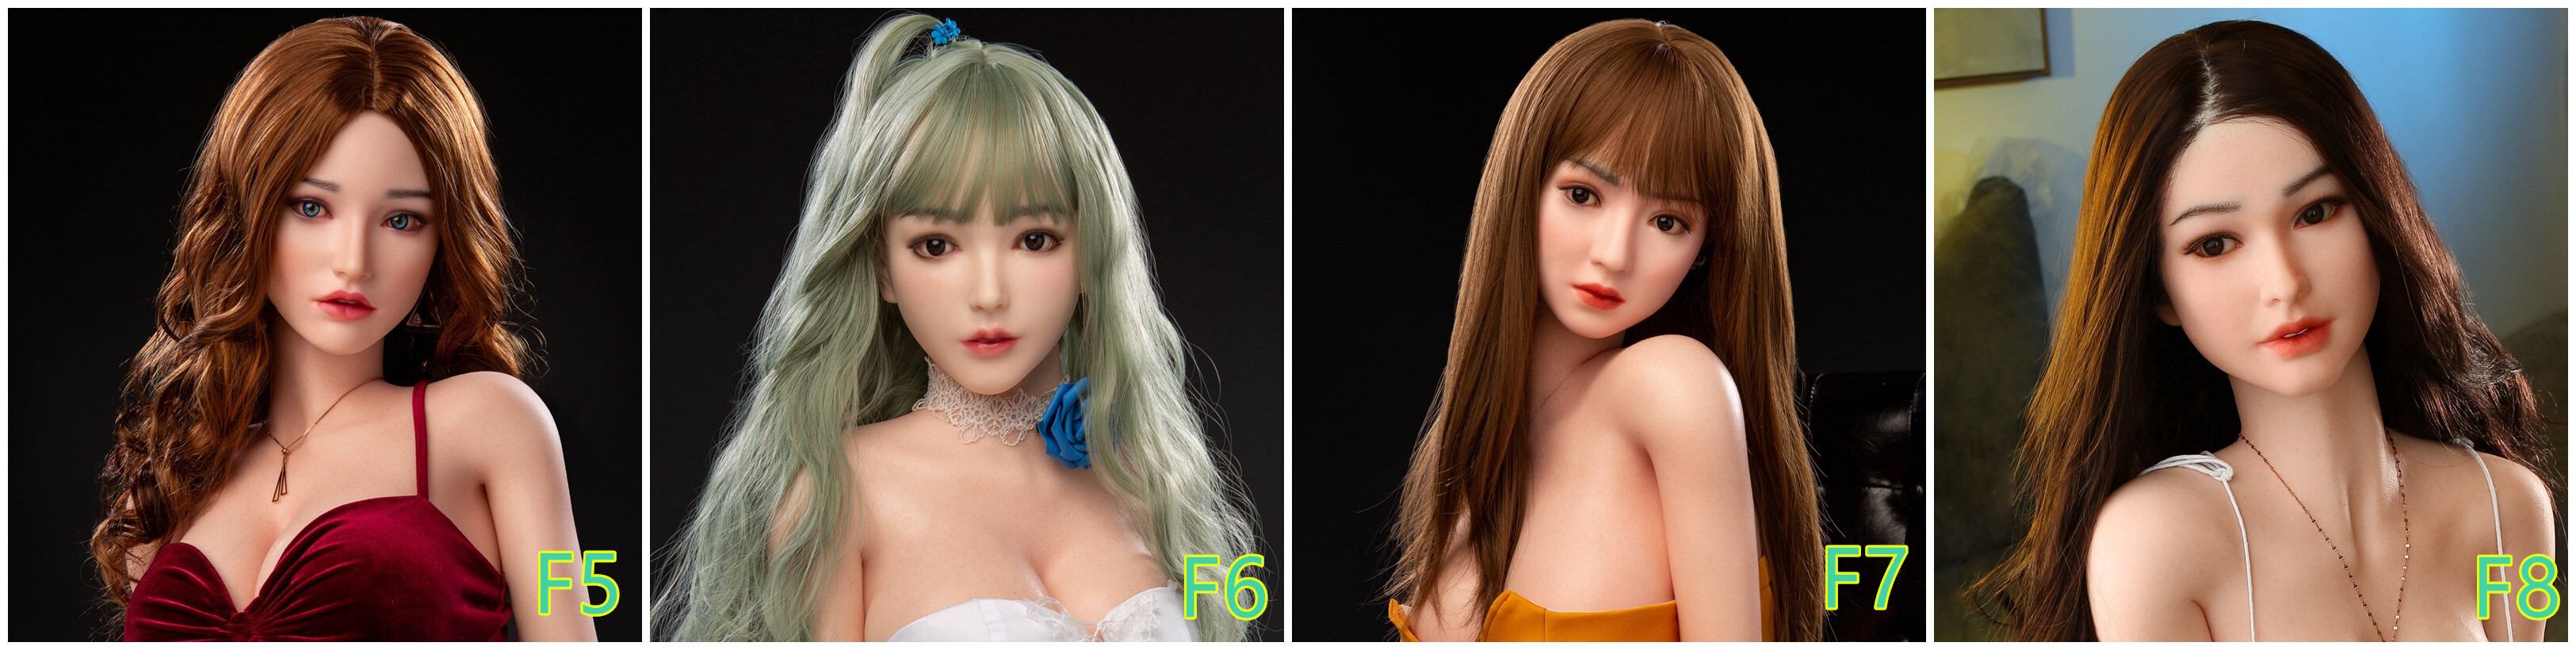 Wholesale Real Sex Dolls Platinum Silicone Love Doll Future Doll 163cm Real Human Size Sex Shop Sexy Mannequin Display Wholesale Real Sex Dolls Future Doll 163cm Human Size Sexy Mannequin 